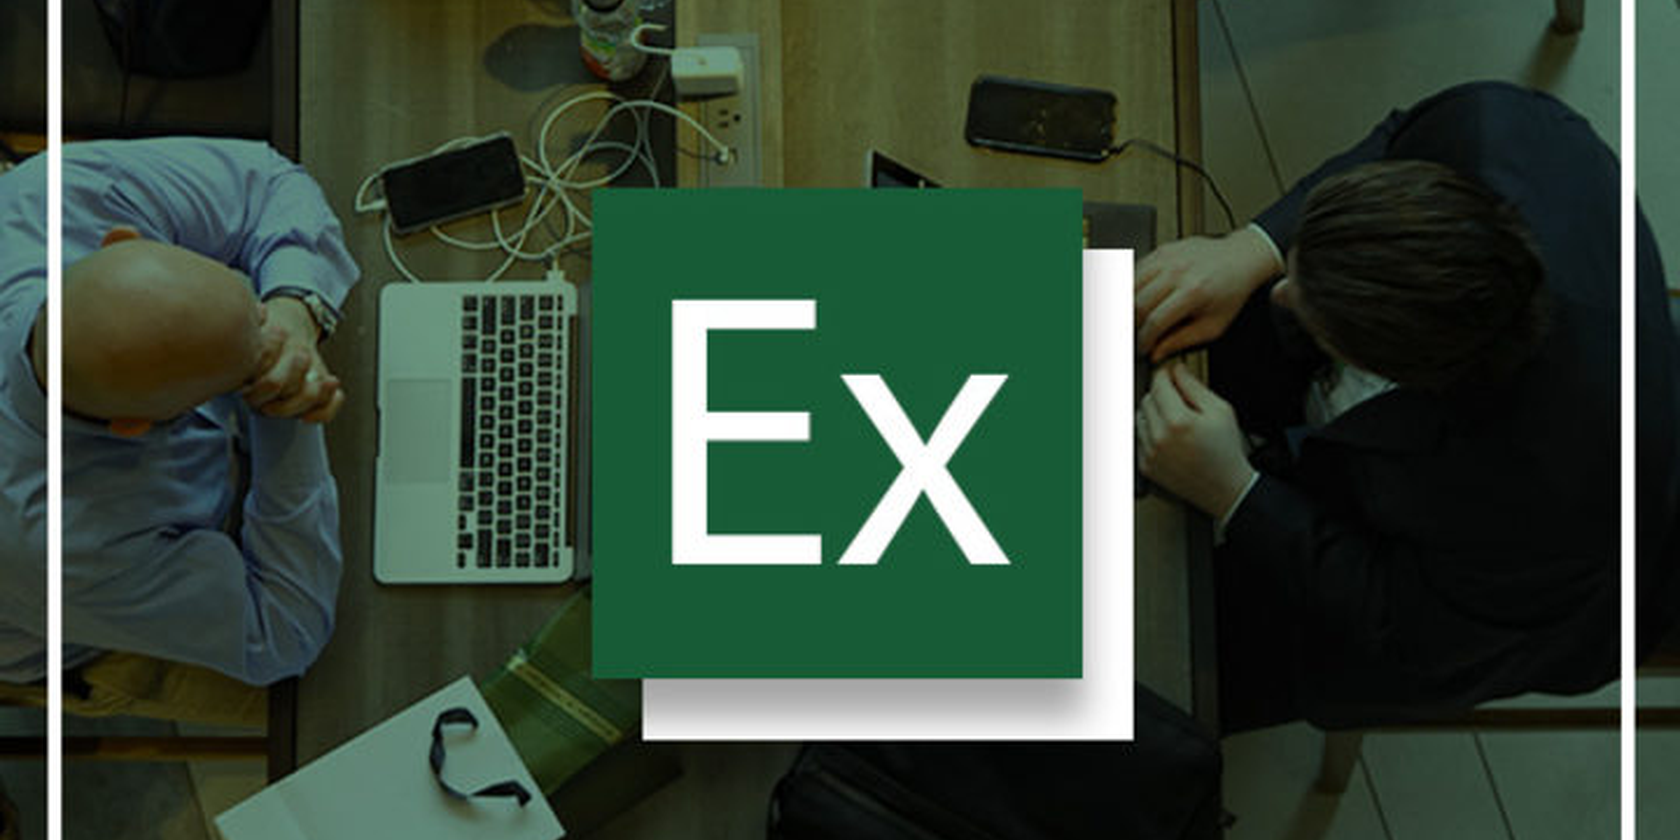 Printing Excel Spreadsheet: Everything You Need to Know